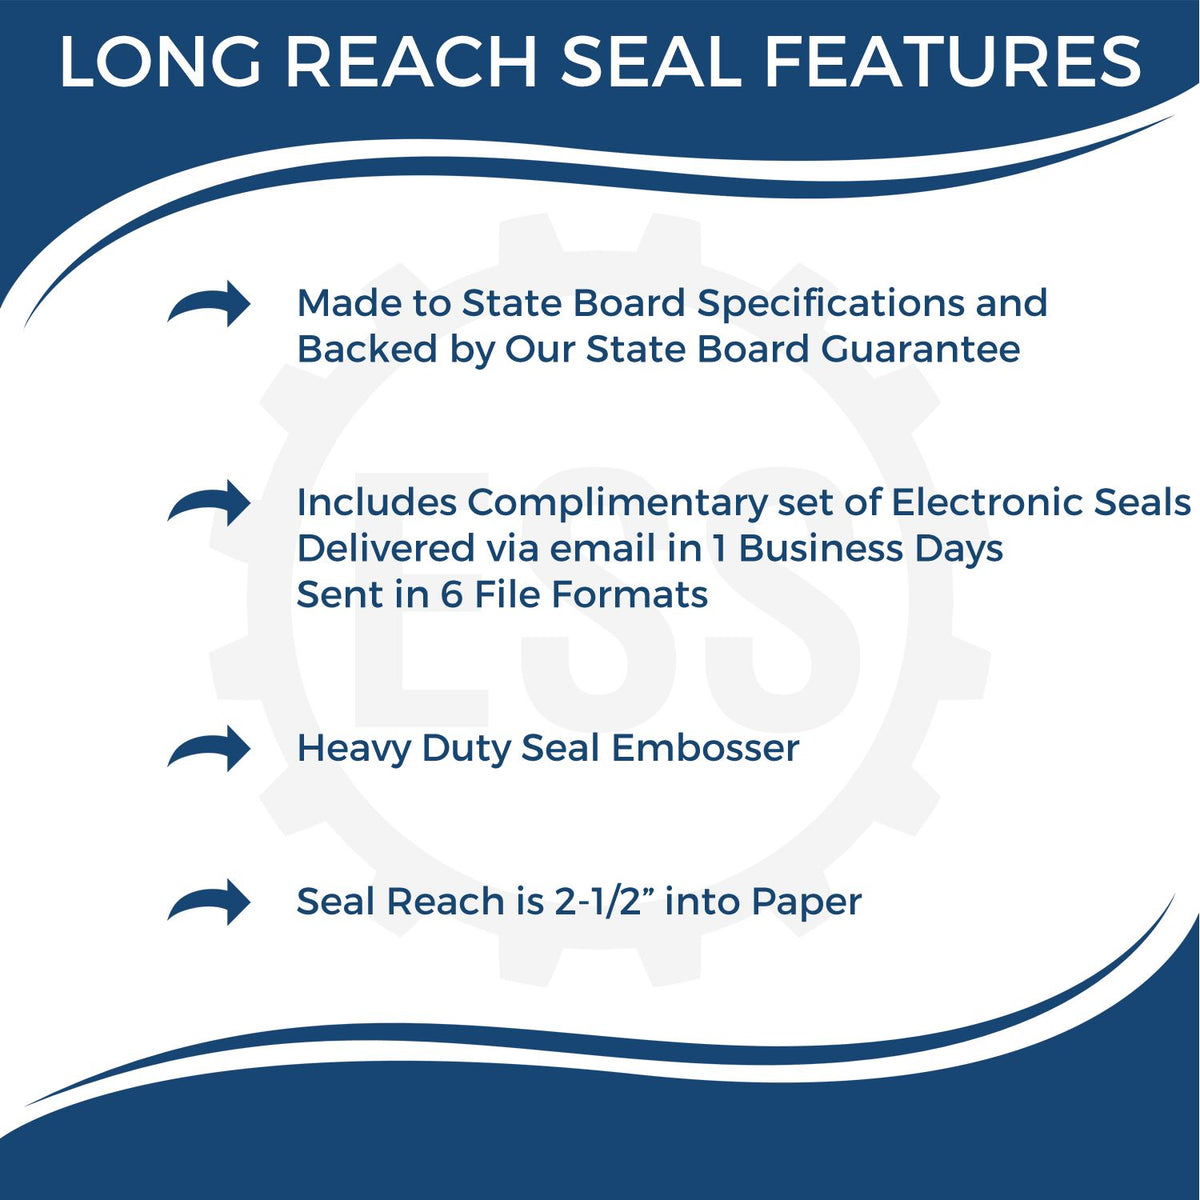 A picture of an infographic highlighting the selling points for the Long Reach Delaware PE Seal